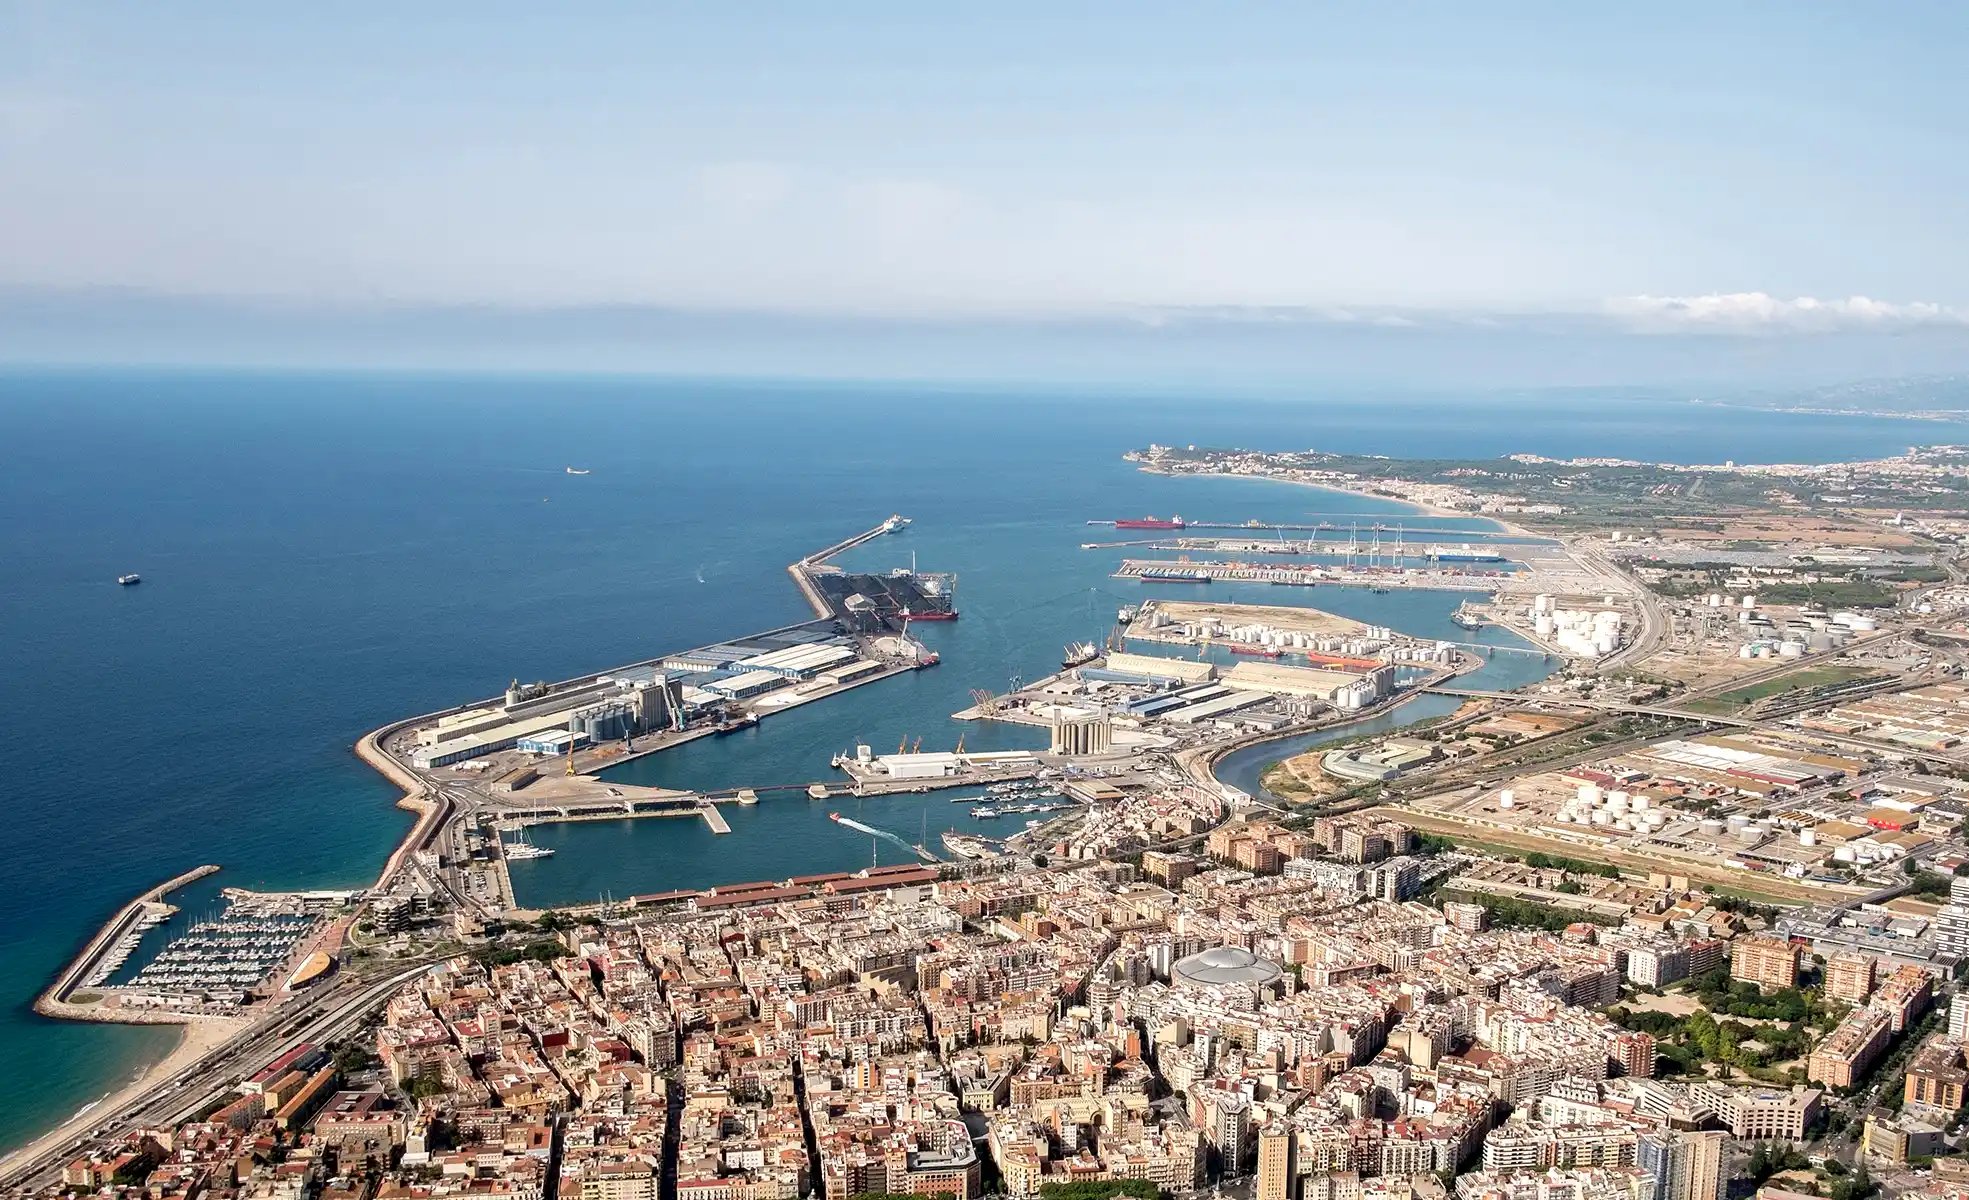 Port of Tarragona from the air.